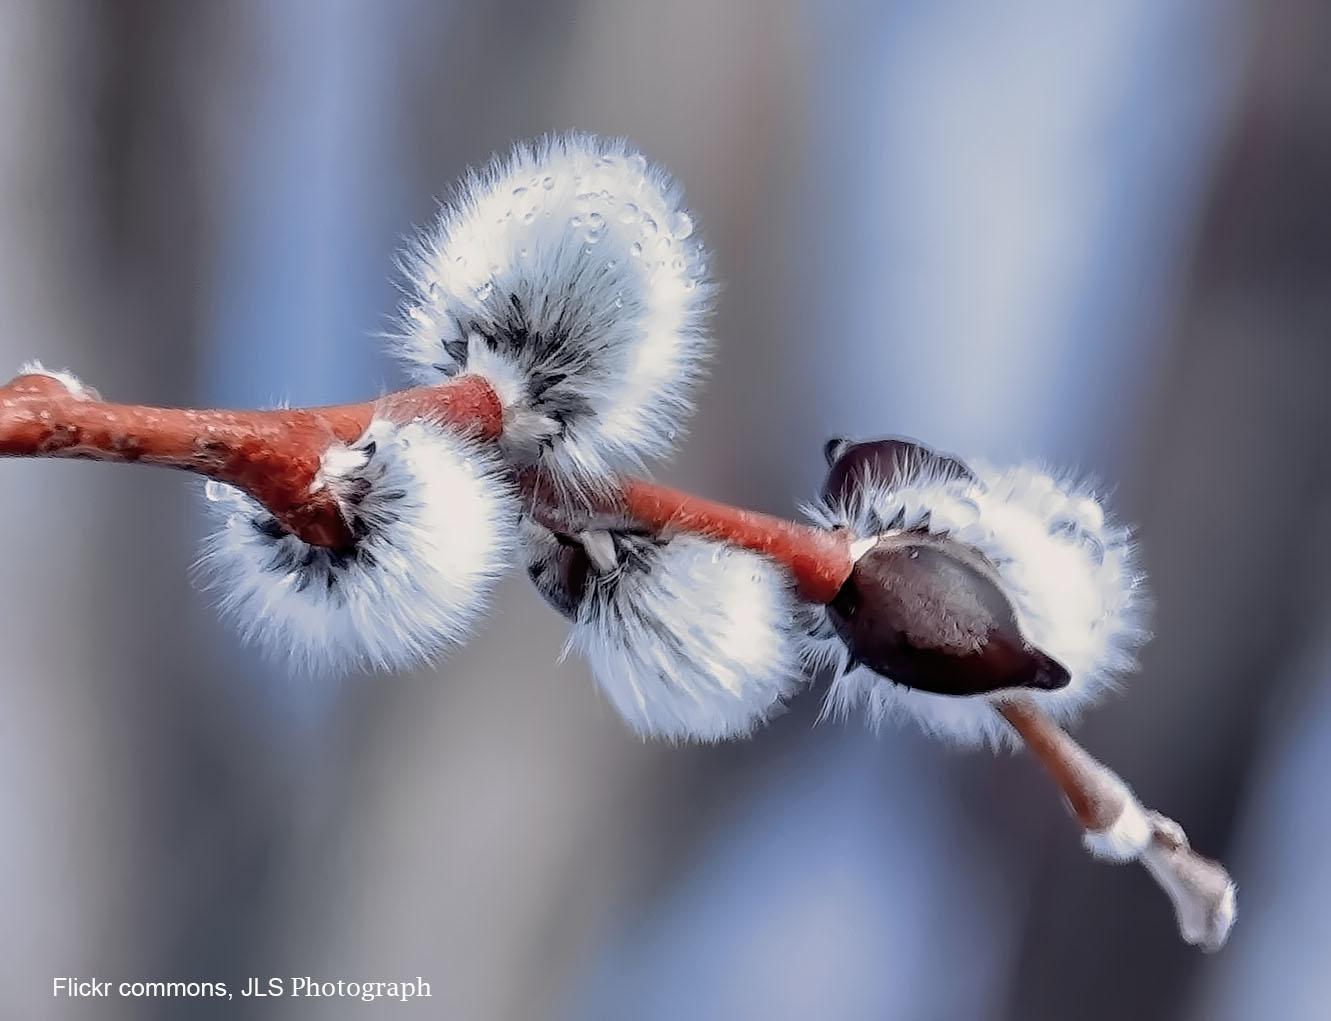 Spring break-up in Alaska means ice and snow start breaking up and new life emerges, This image of buds blooming shows how spring lift winter's weight and allows growth. 